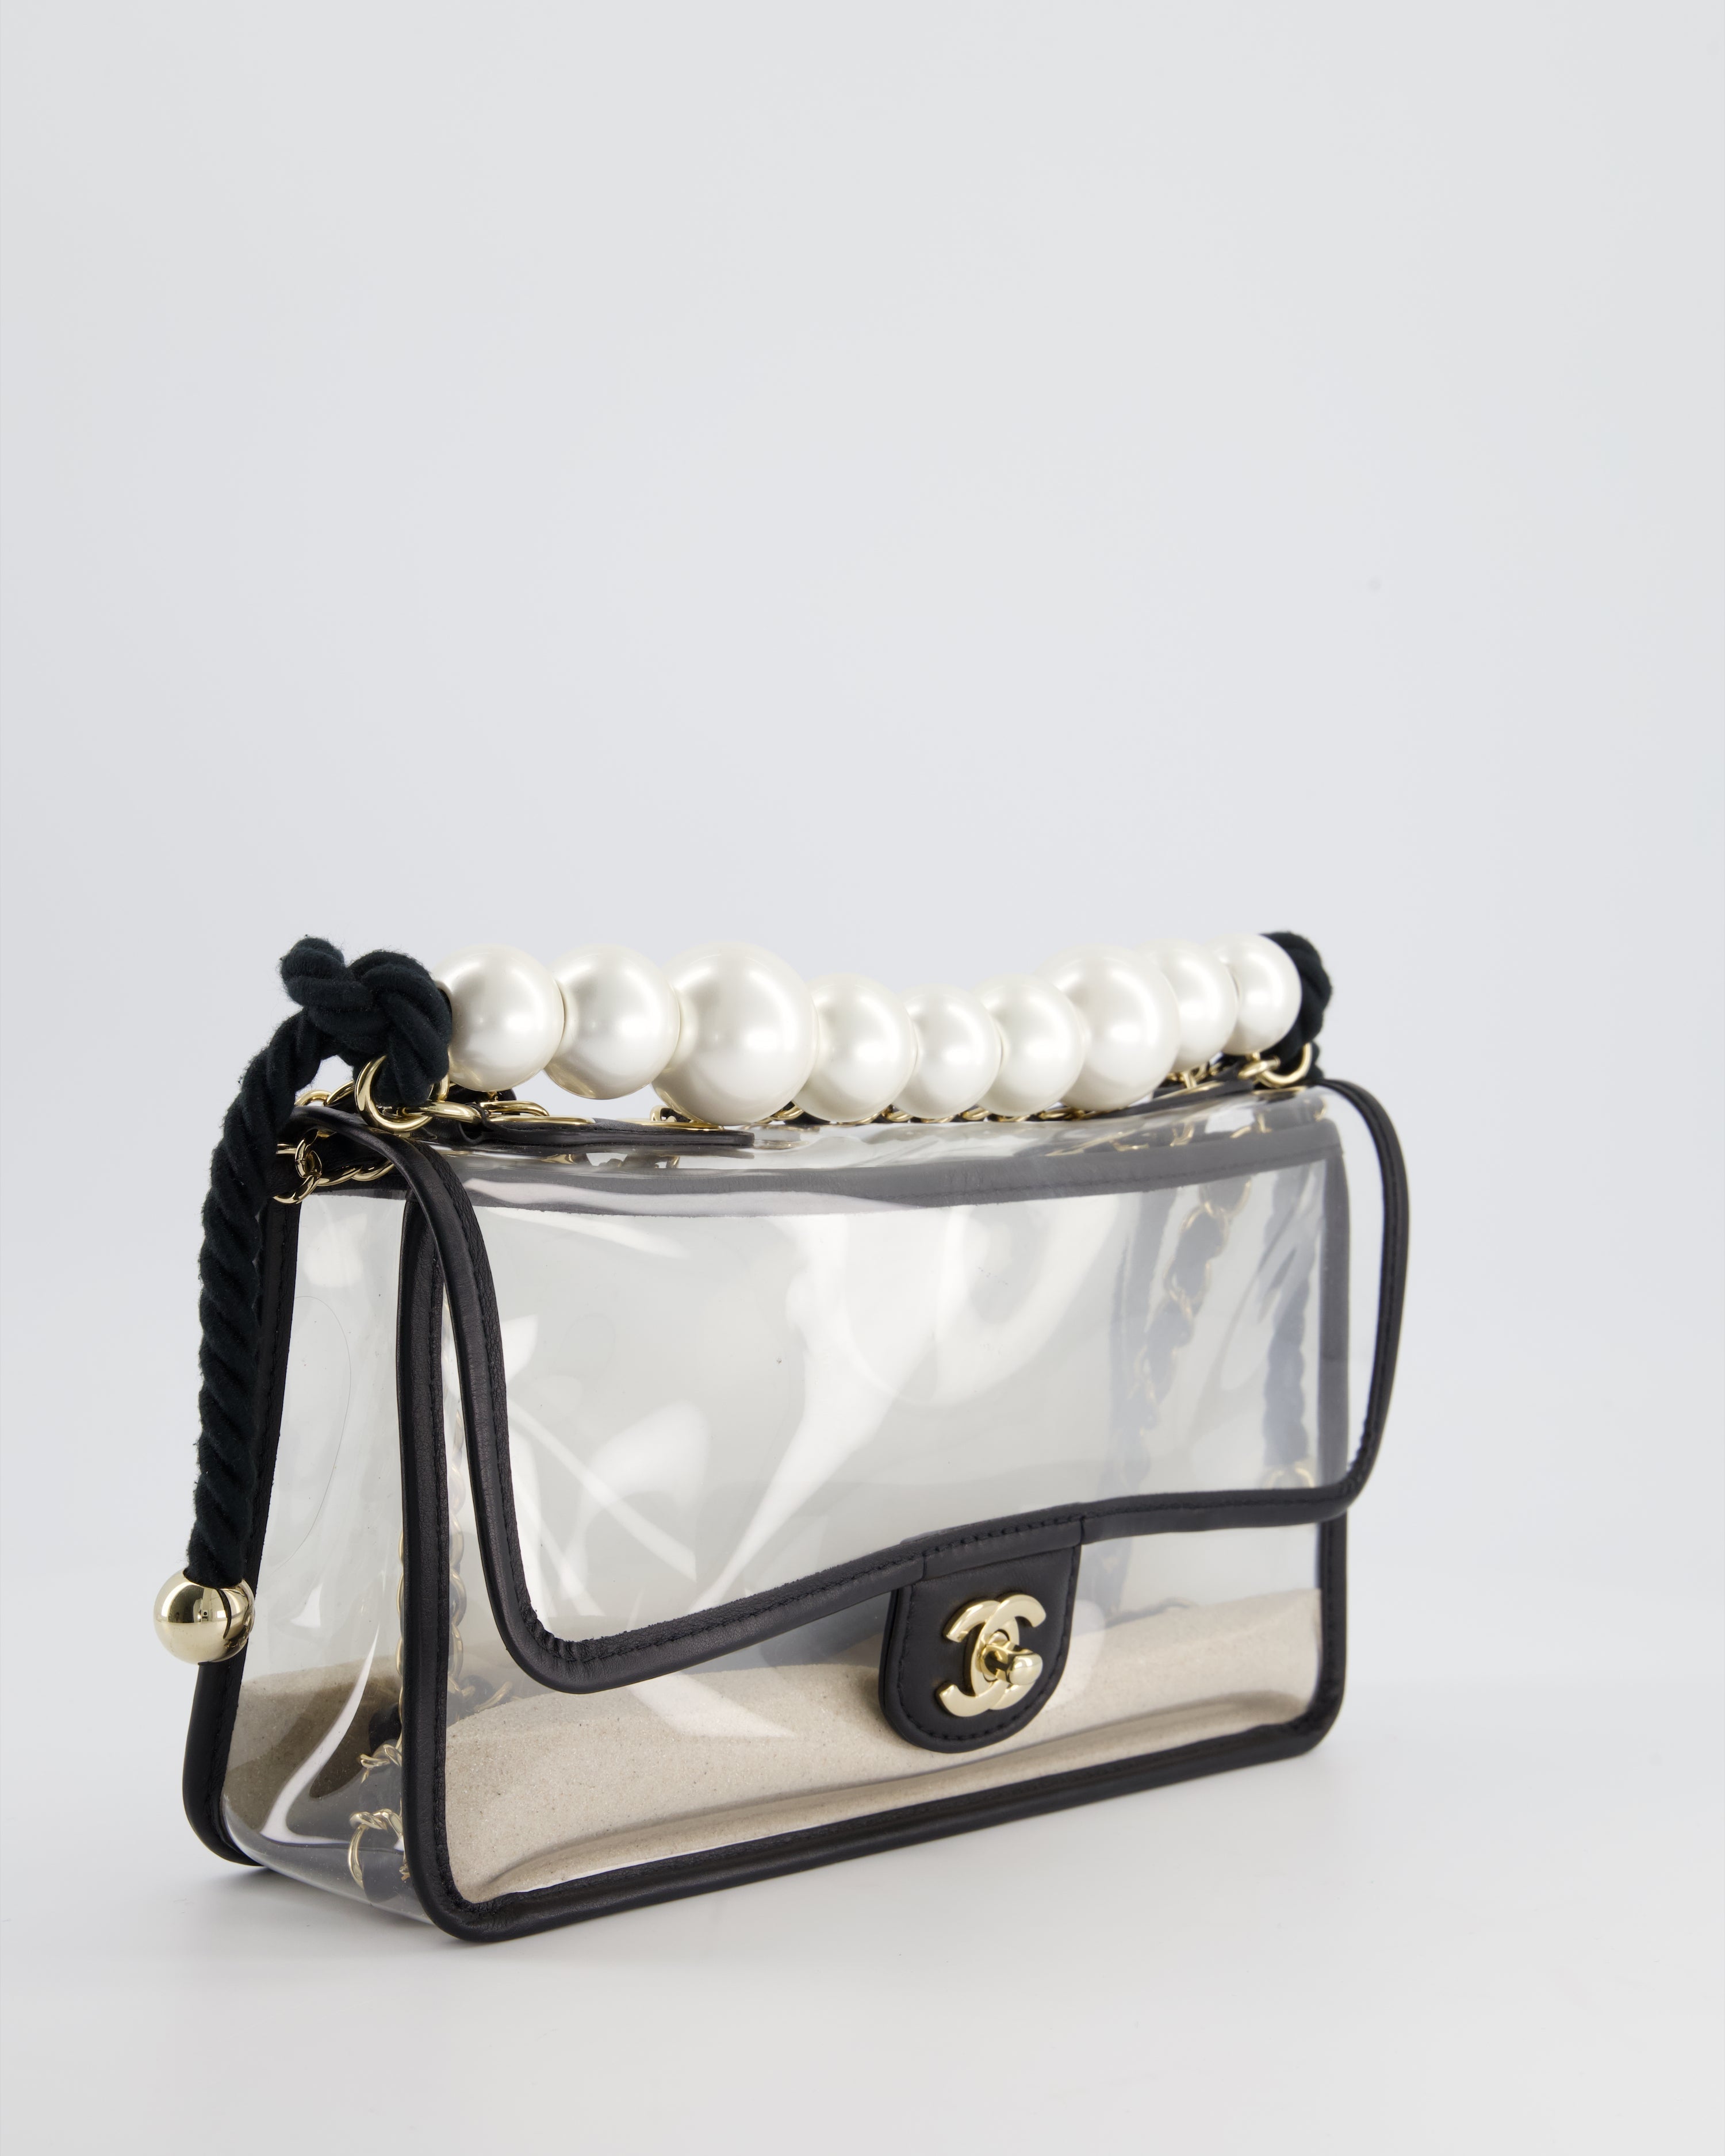 Chanel Coco Sand Pearl Strap Medium Flap with Champagne Gold Hardware